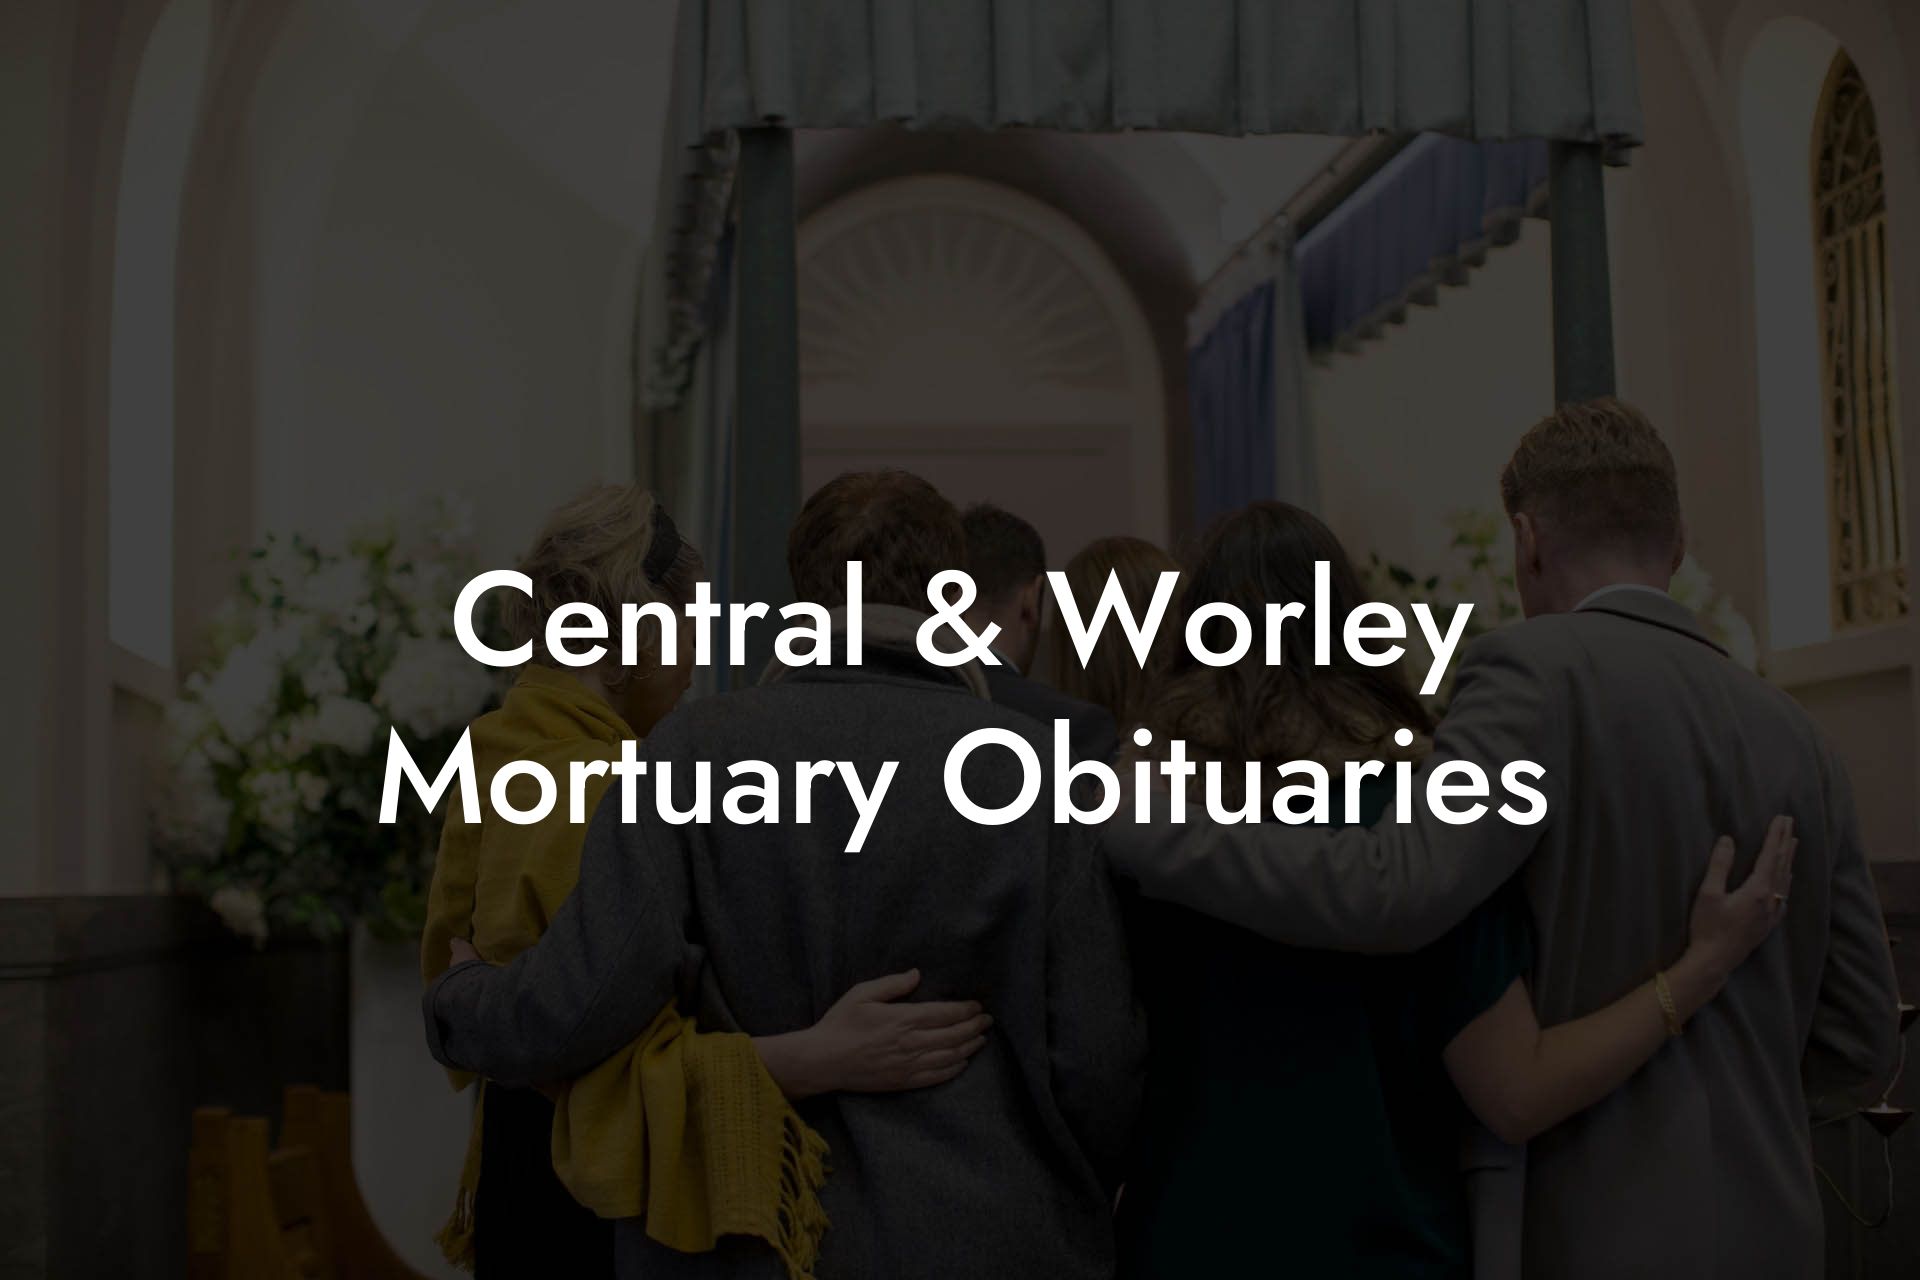 Central & Worley Mortuary Obituaries